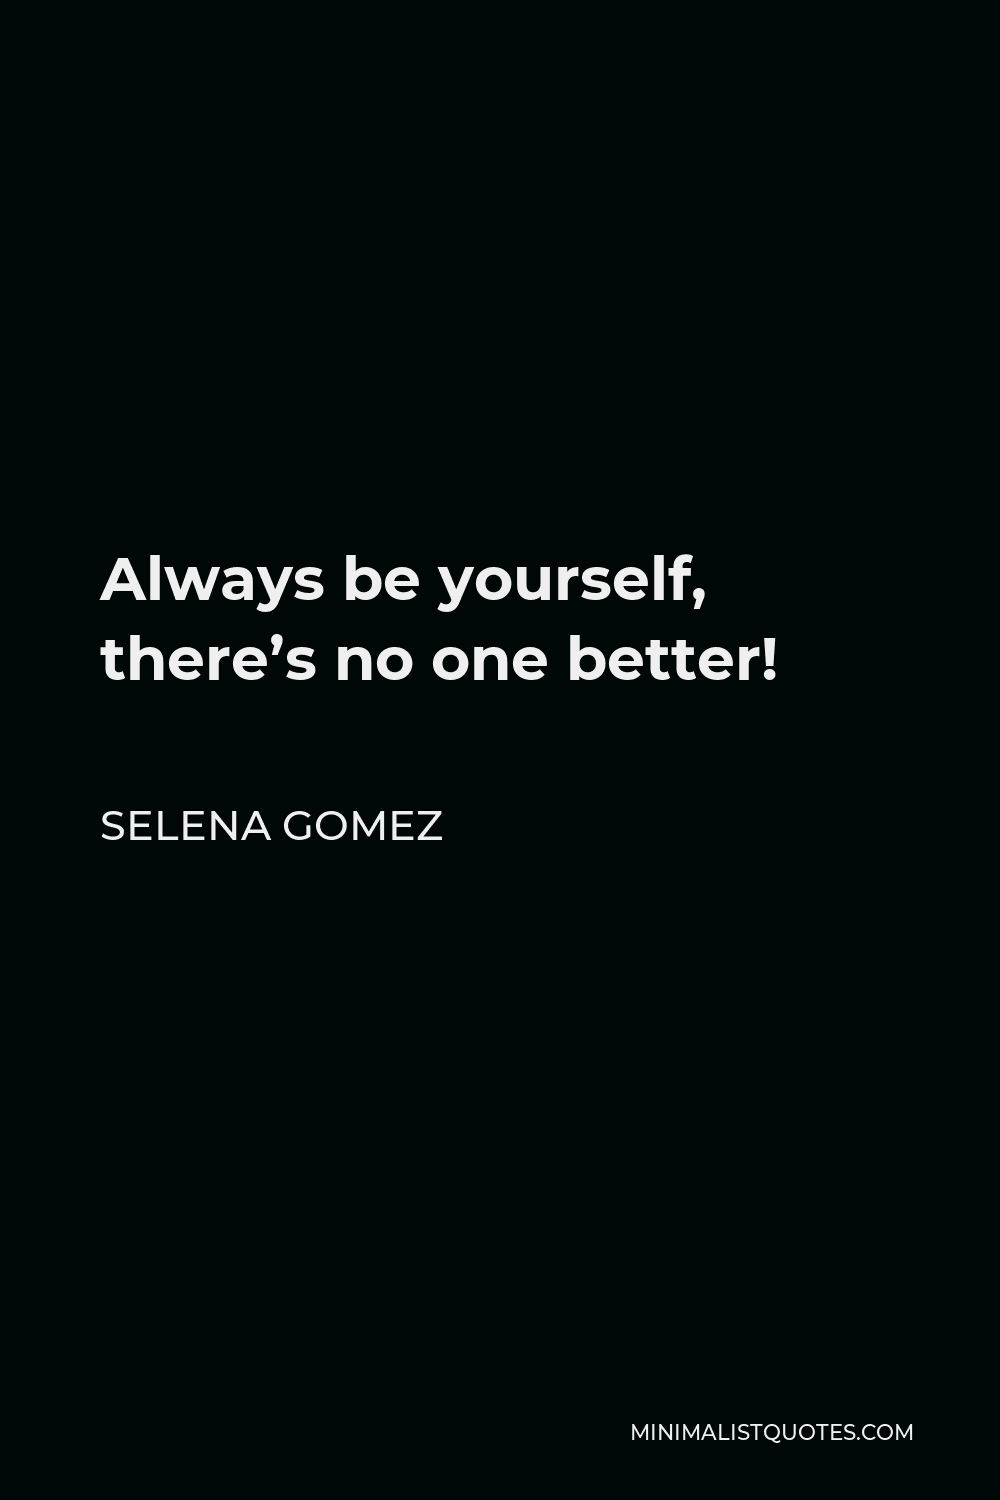 Selena Gomez Quote - Always be yourself, there’s no one better!